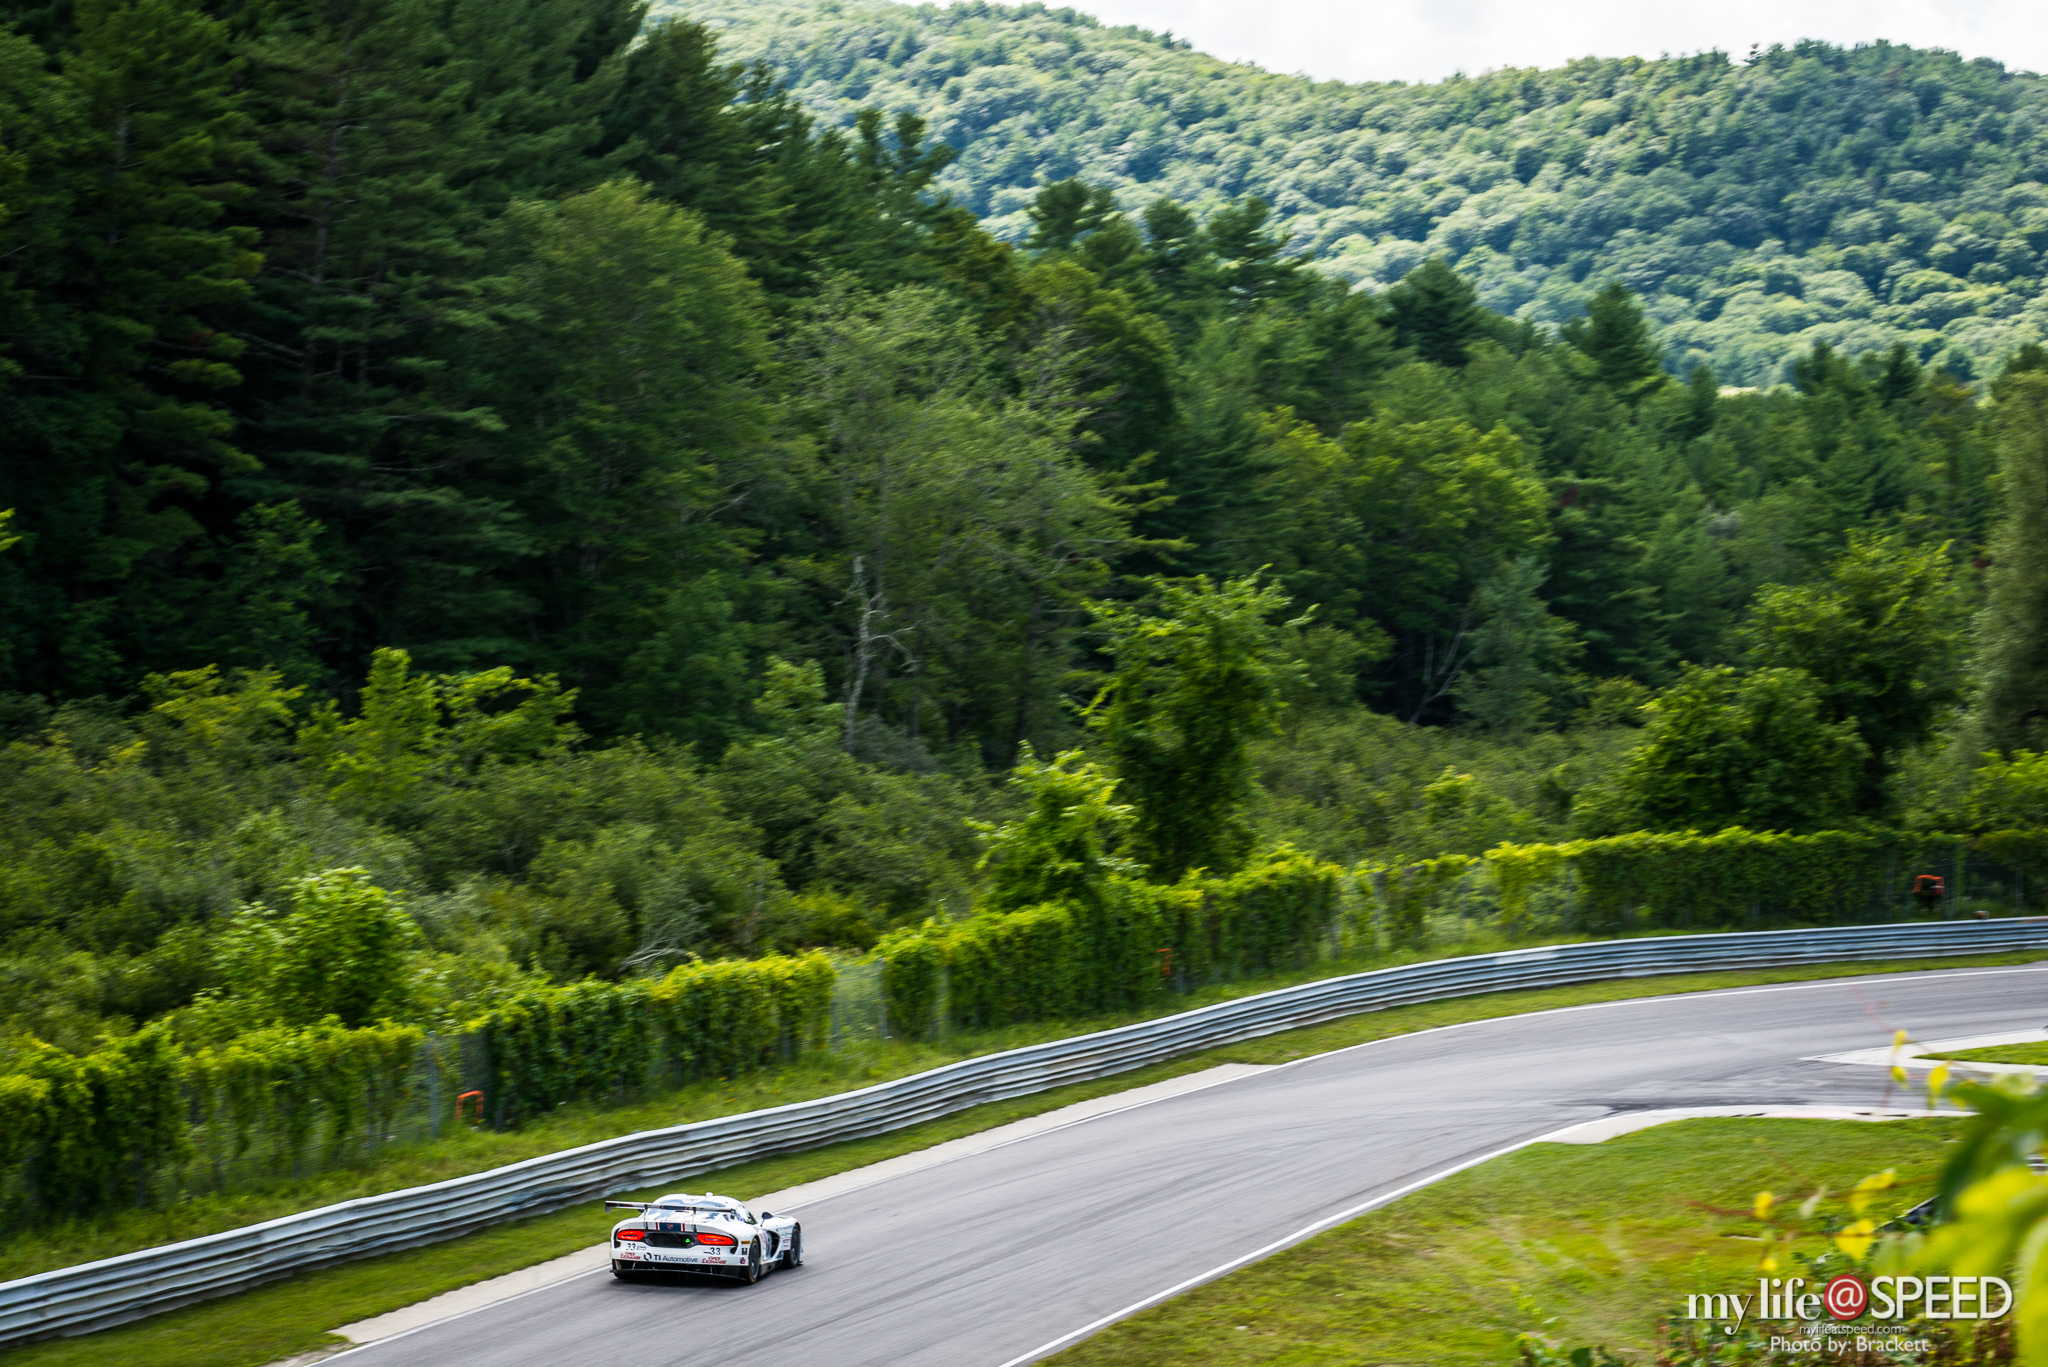 Viper Exchange and their Viper SRT GT3-R going through the valley